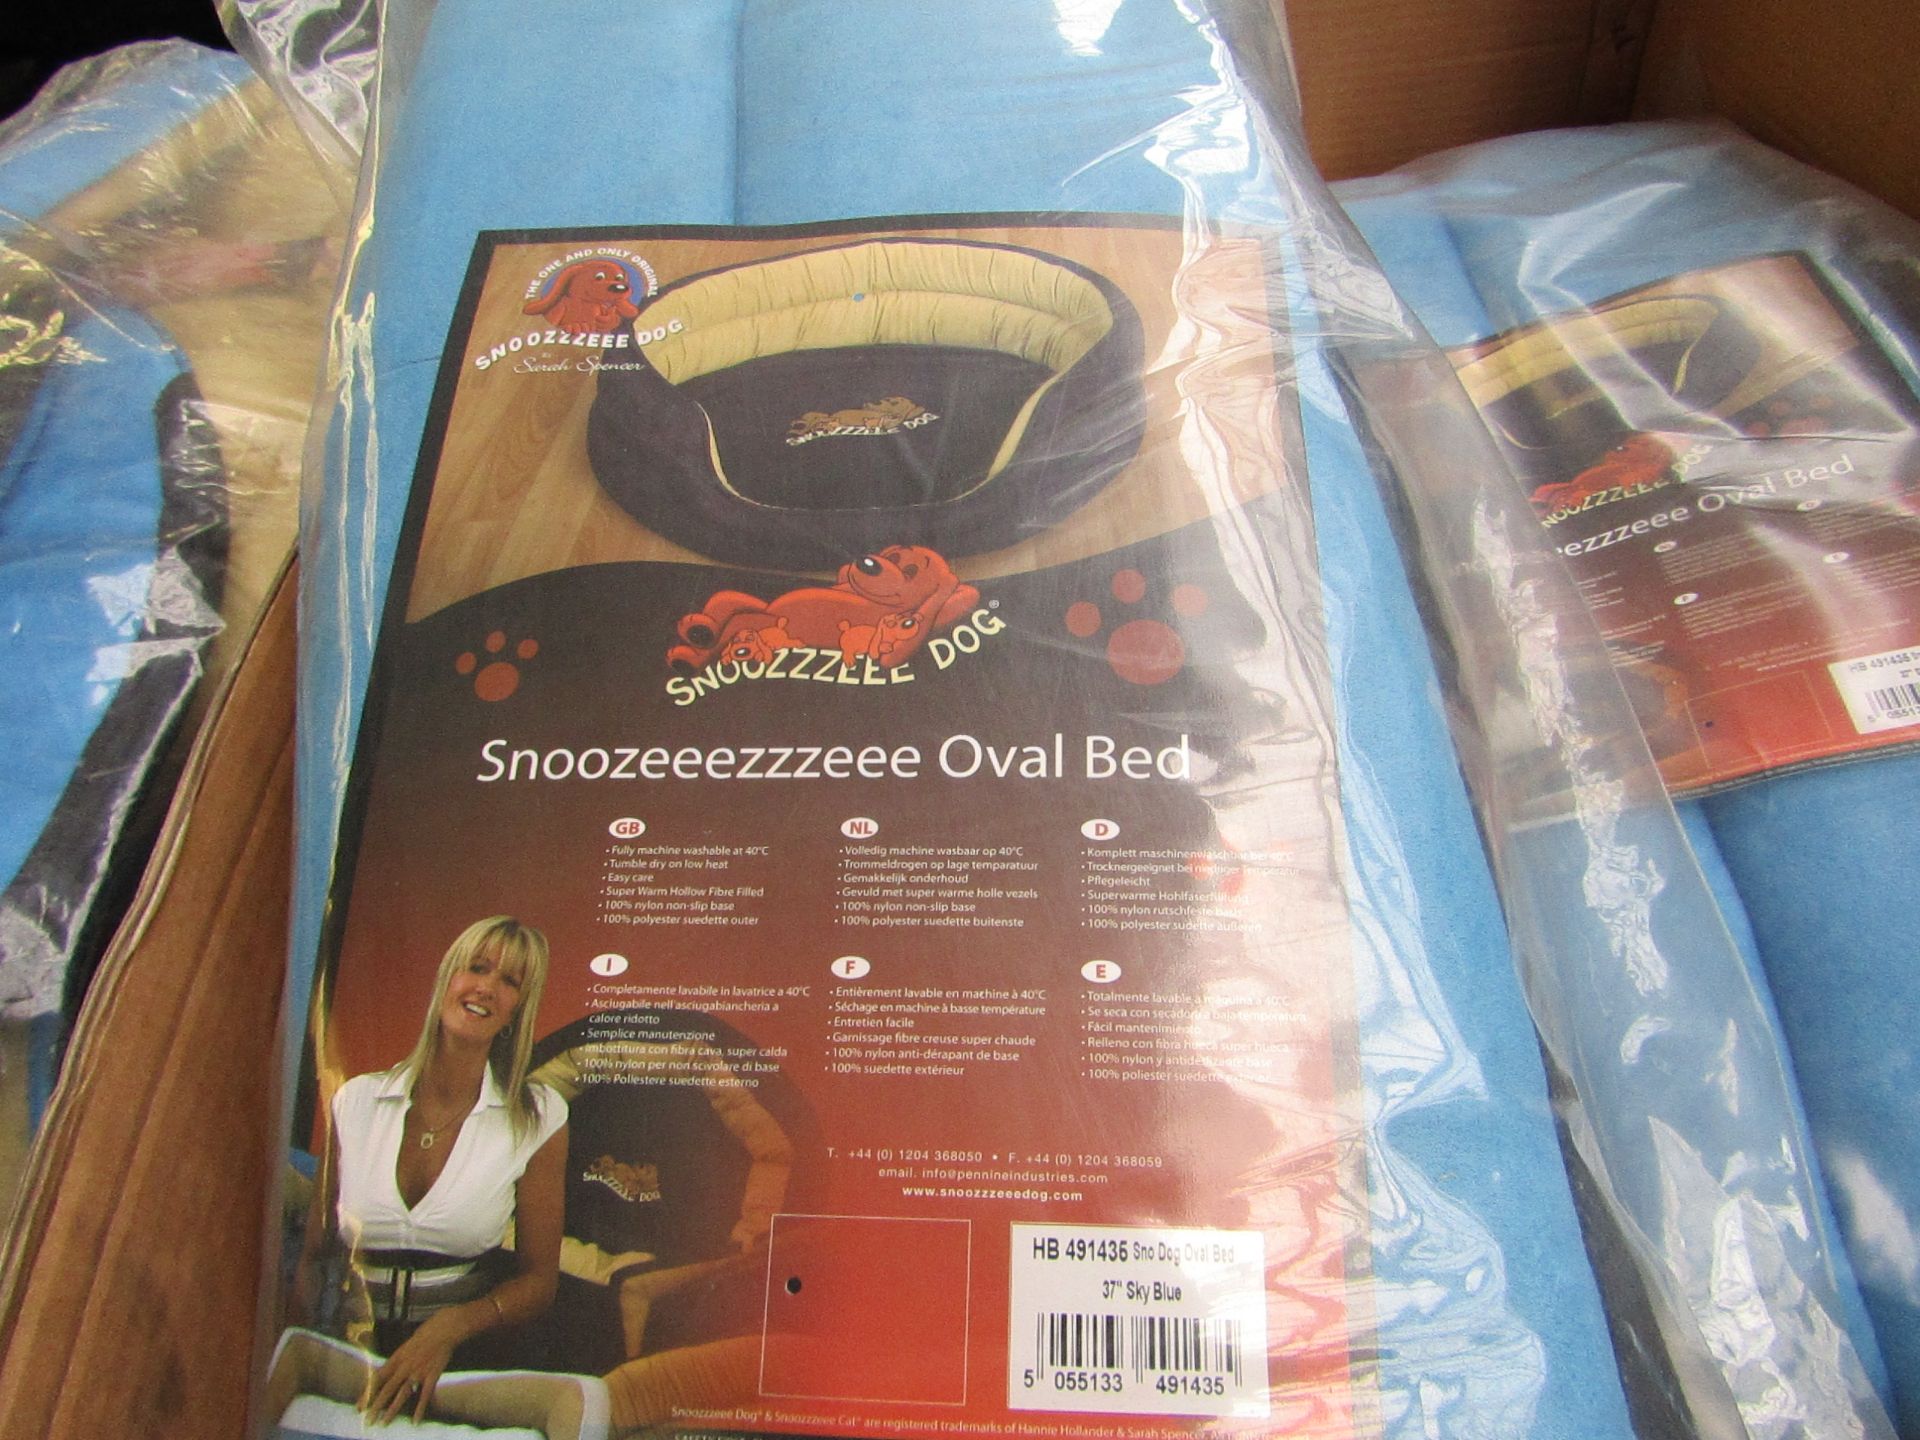 5x Snoozzzeee Dog - Oval Sky Blue Dog Bed (37") - All New & Packaged.